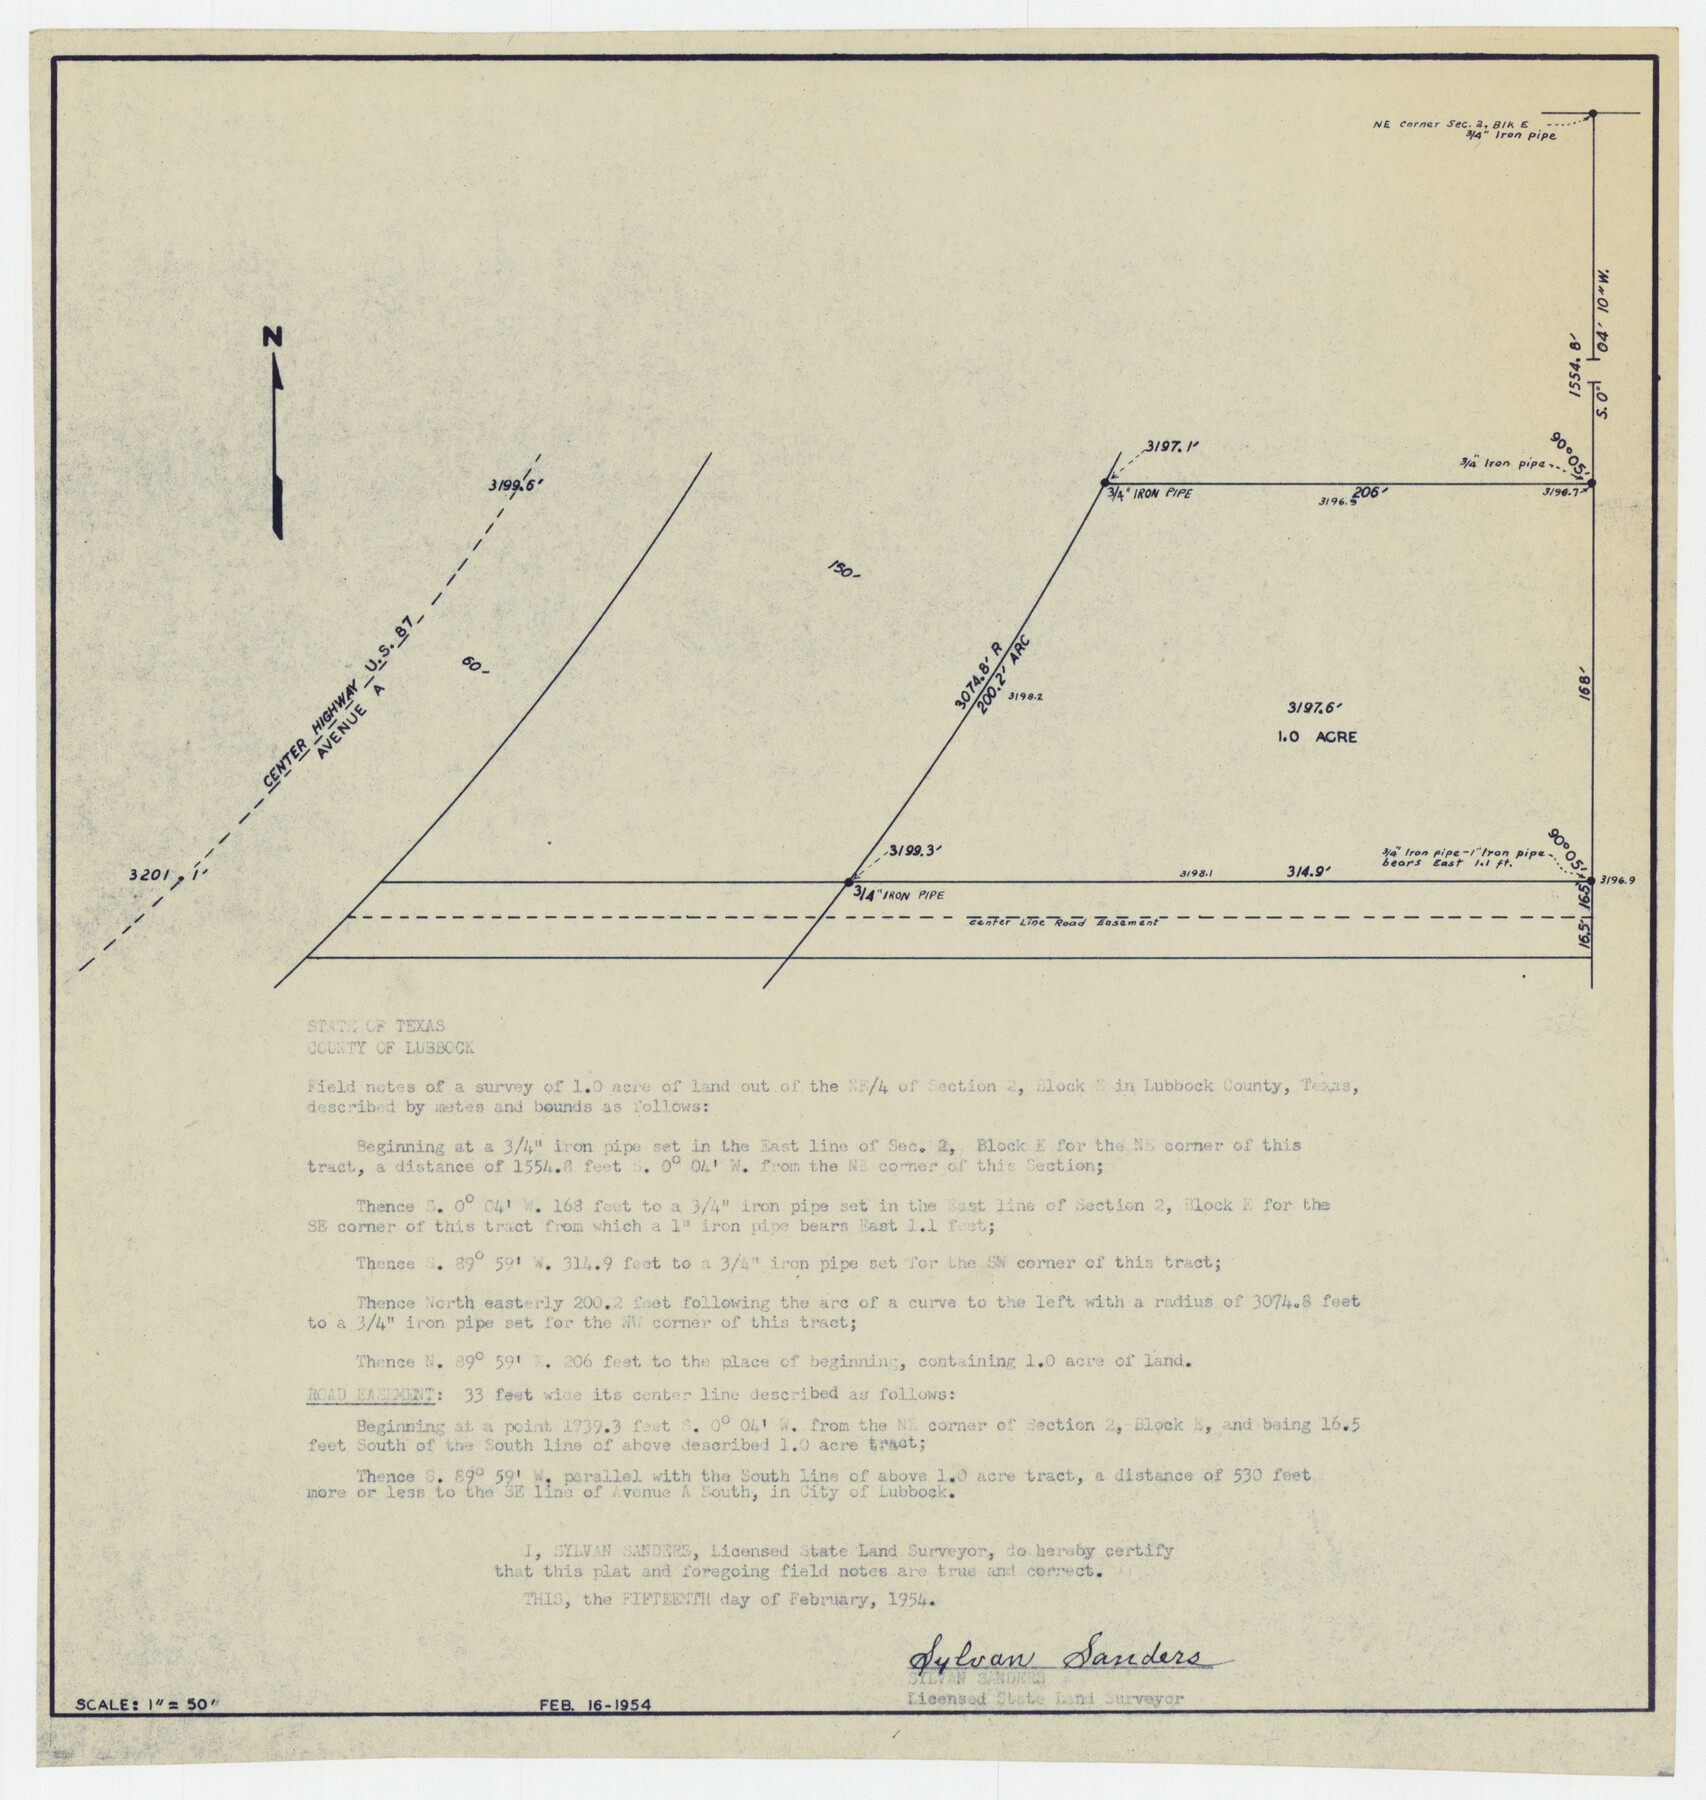 92706, [Plat showing 1.0 acre of land out of the NE/4 of Section 2, Block E], Twichell Survey Records